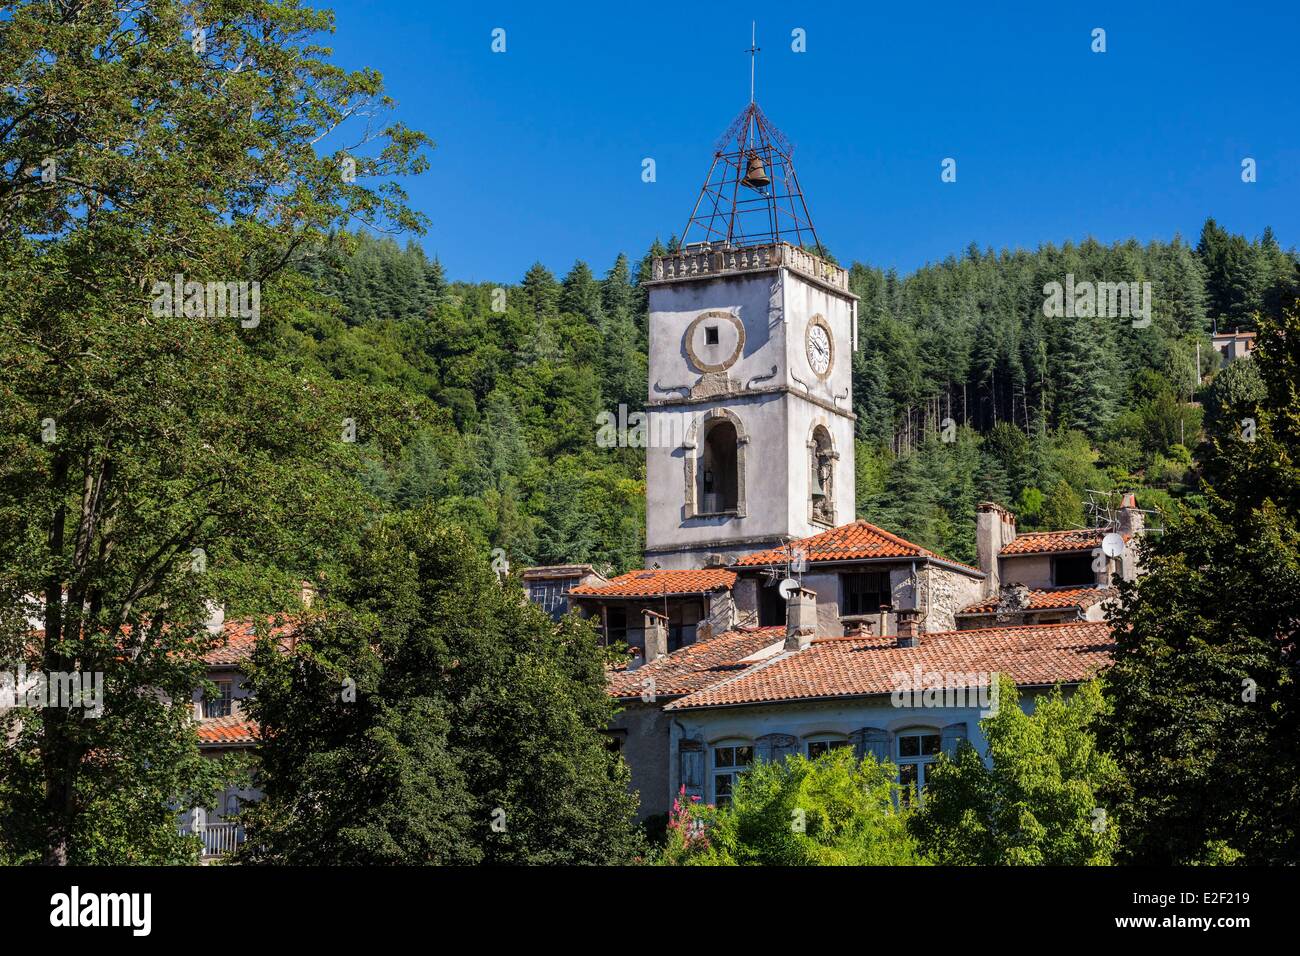 France, Gard, Cevennes National Park, Le Vigan, the bell tower of the church Saint Pierre Stock Photo